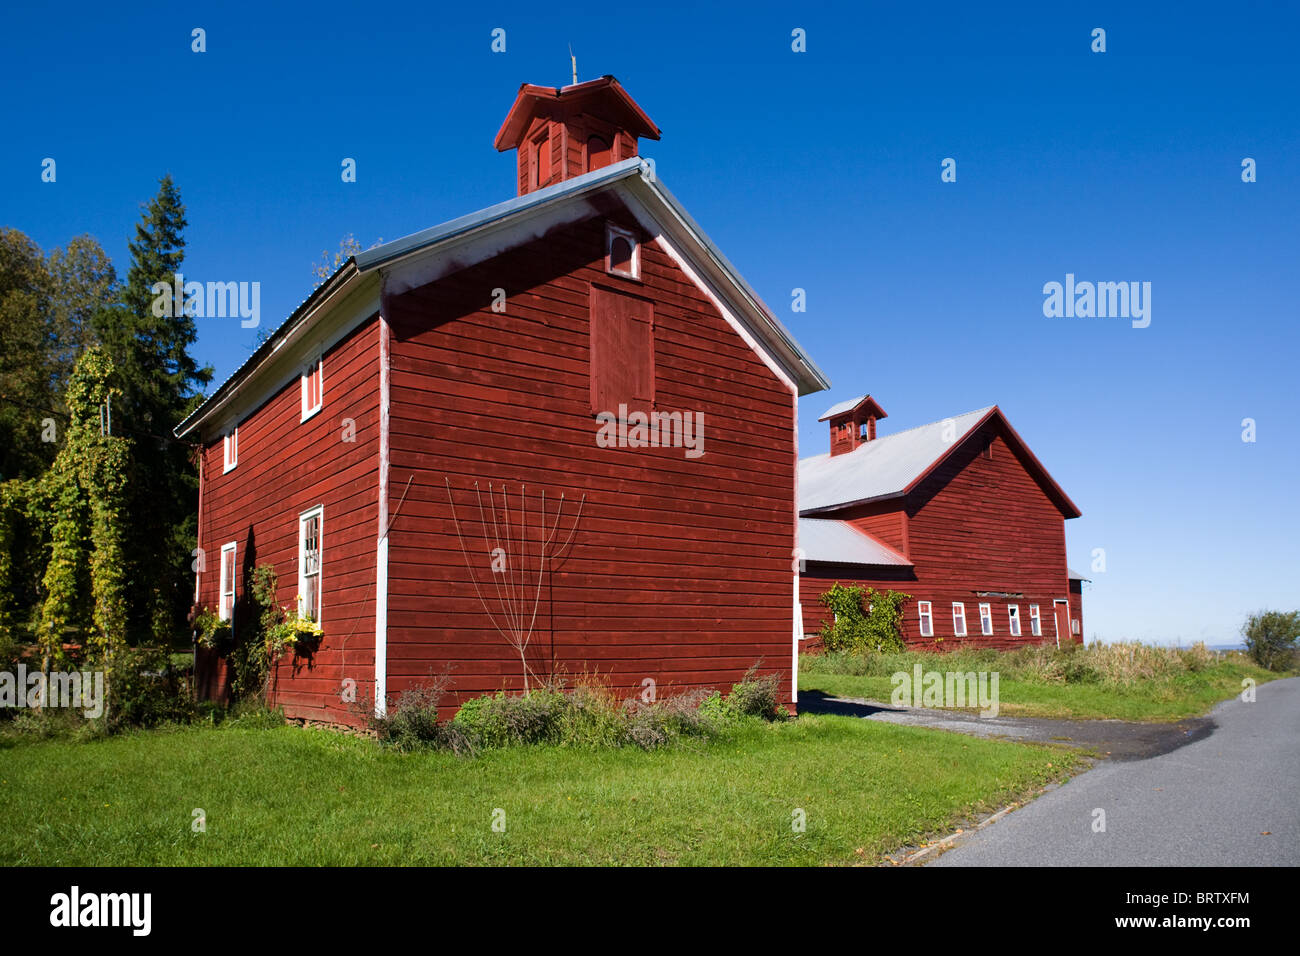 The reddest of red barns, farm country of Mohawk Valley, New York State Stock Photo